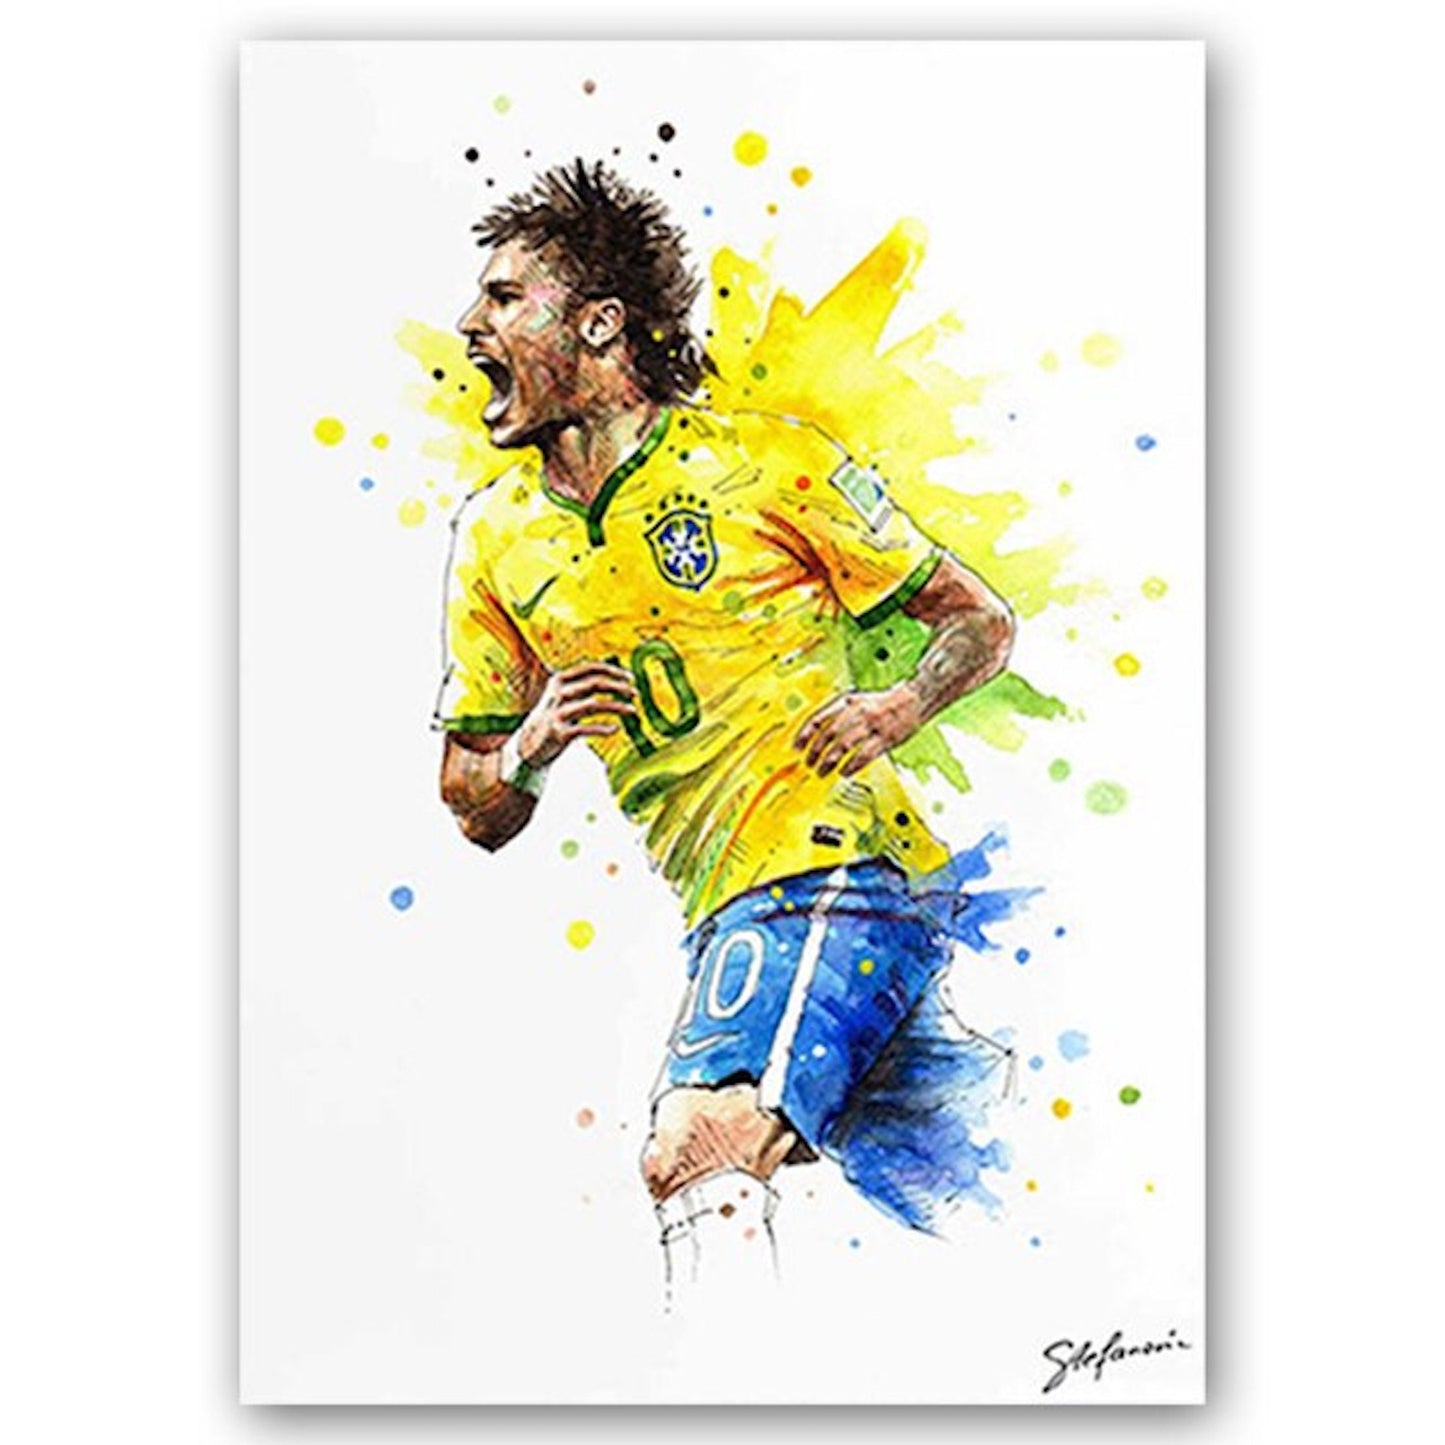 Poster soccer player goal jubilation Lionel Messi and Christiano Ronaldo as a decorative print without a frame